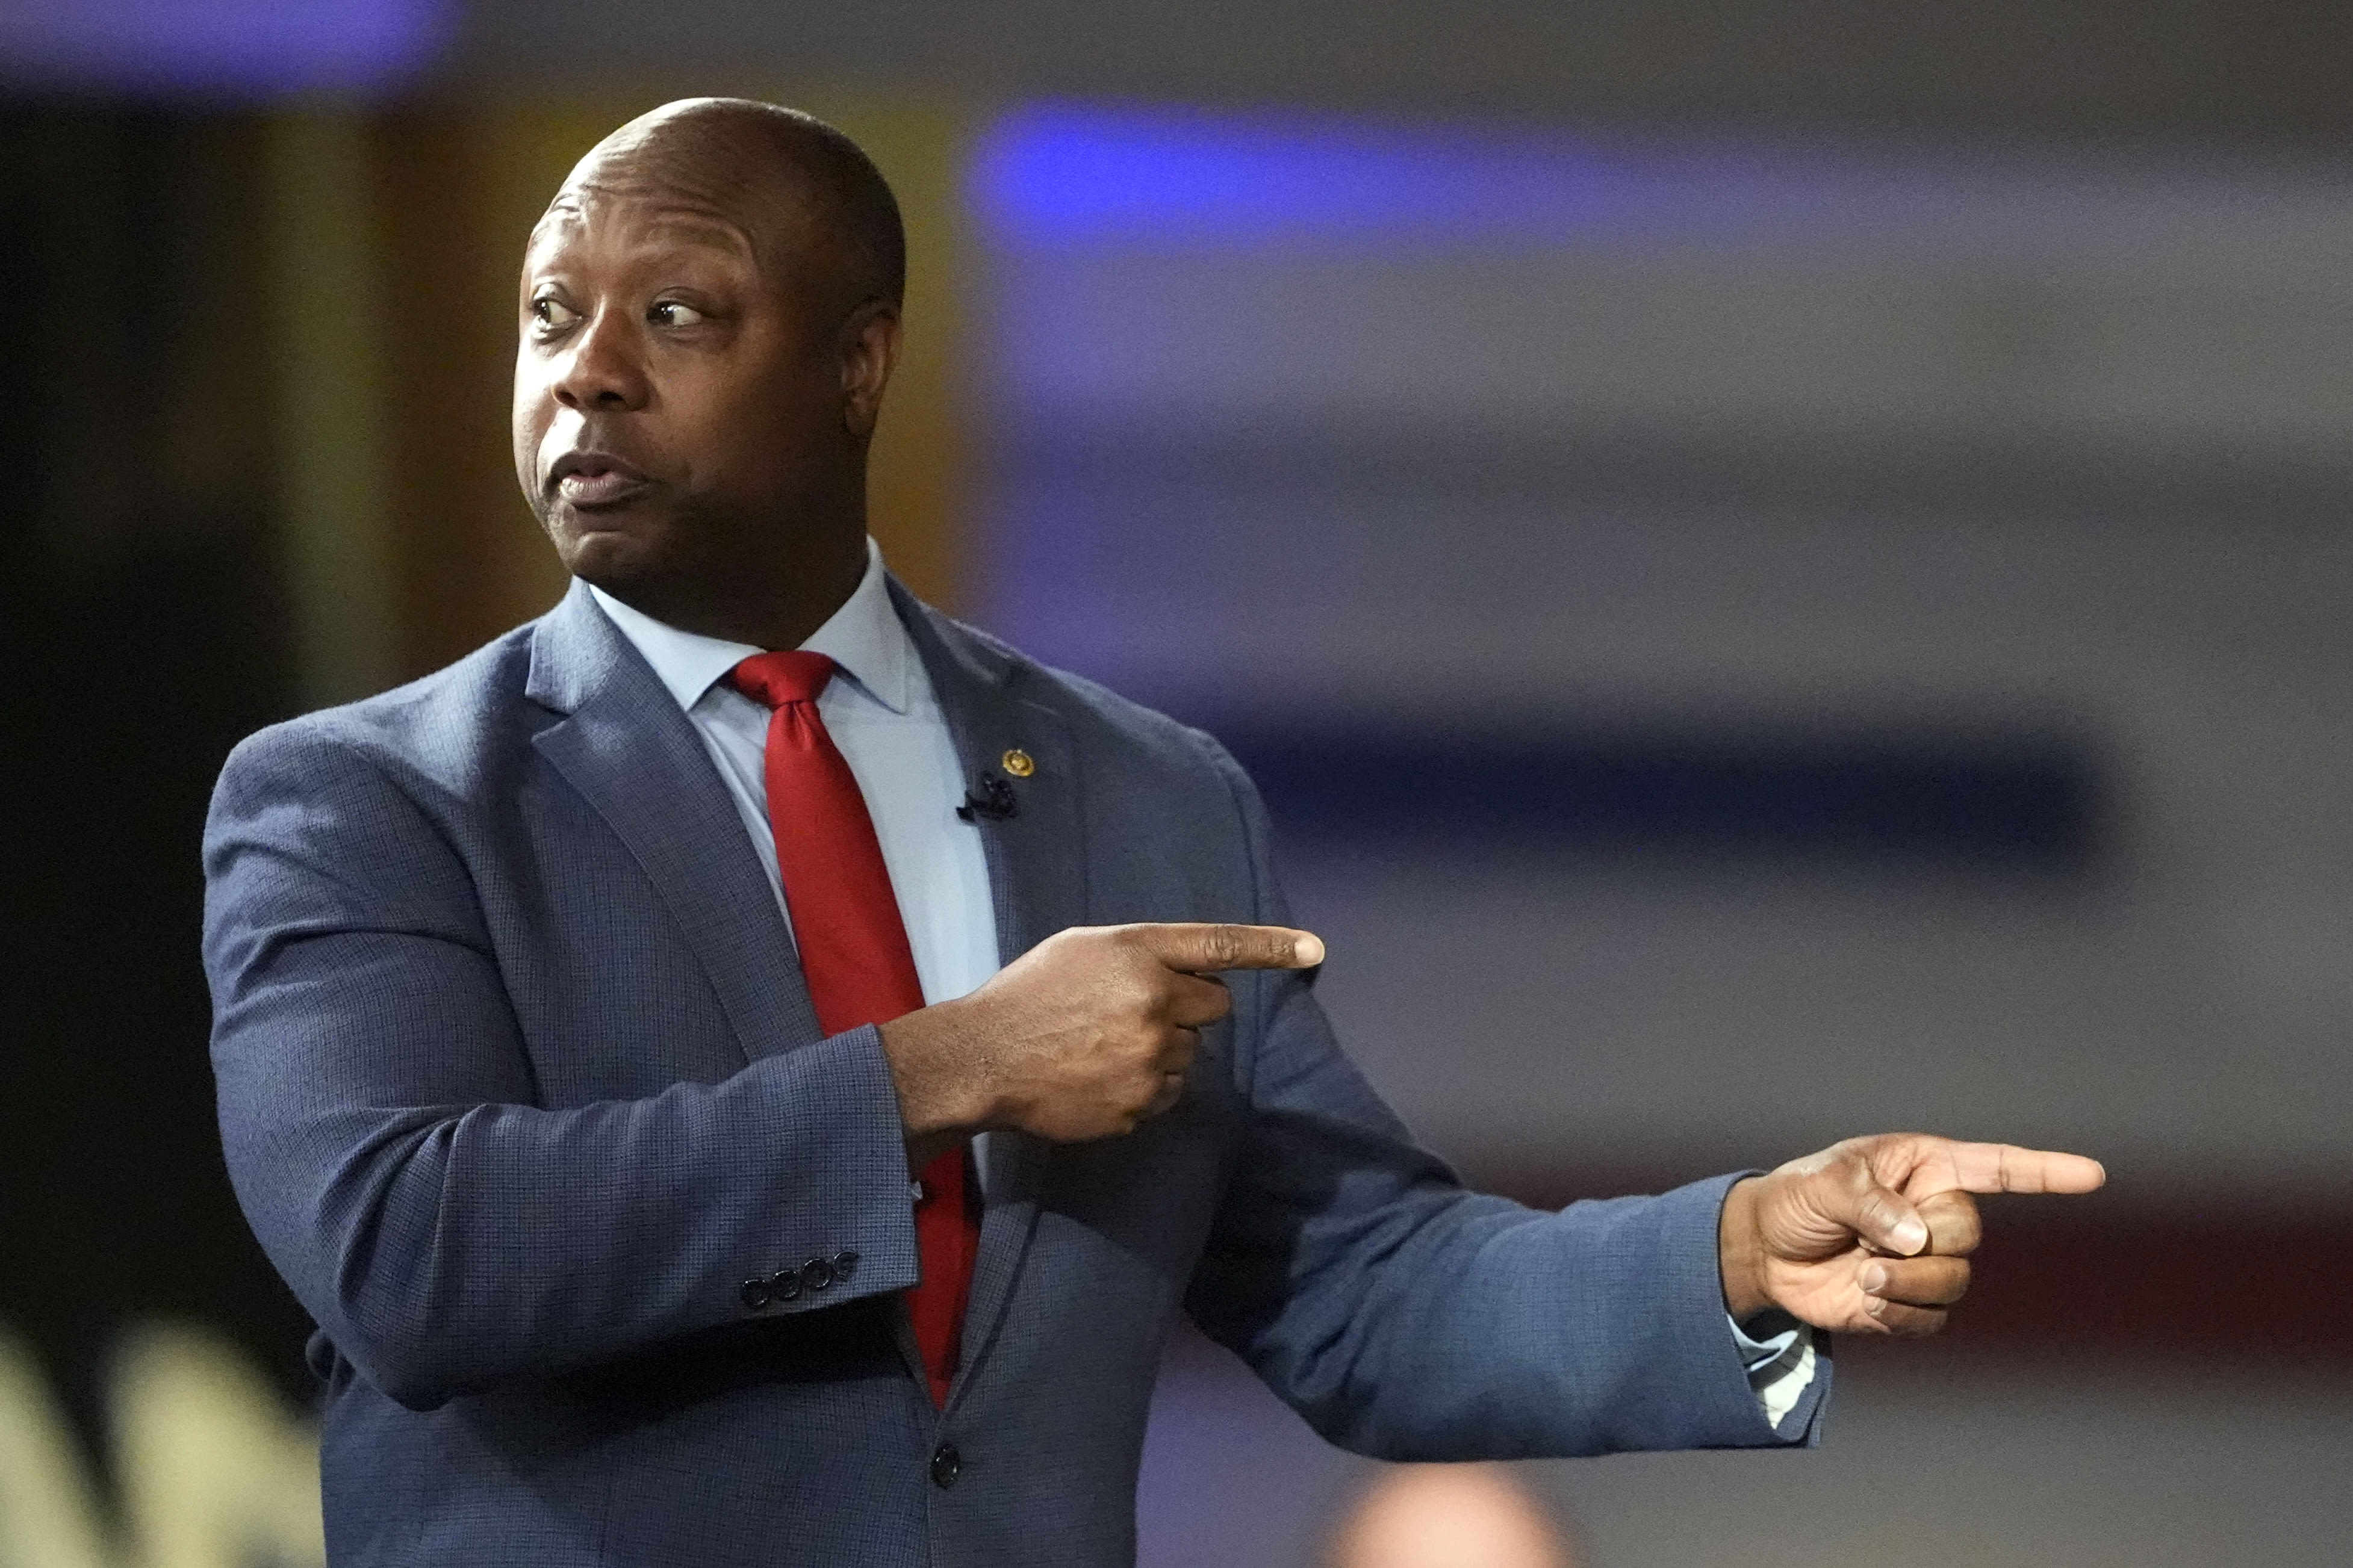 Tim Scott-aligned PAC promises to spend $14 million on outreach to voters of color